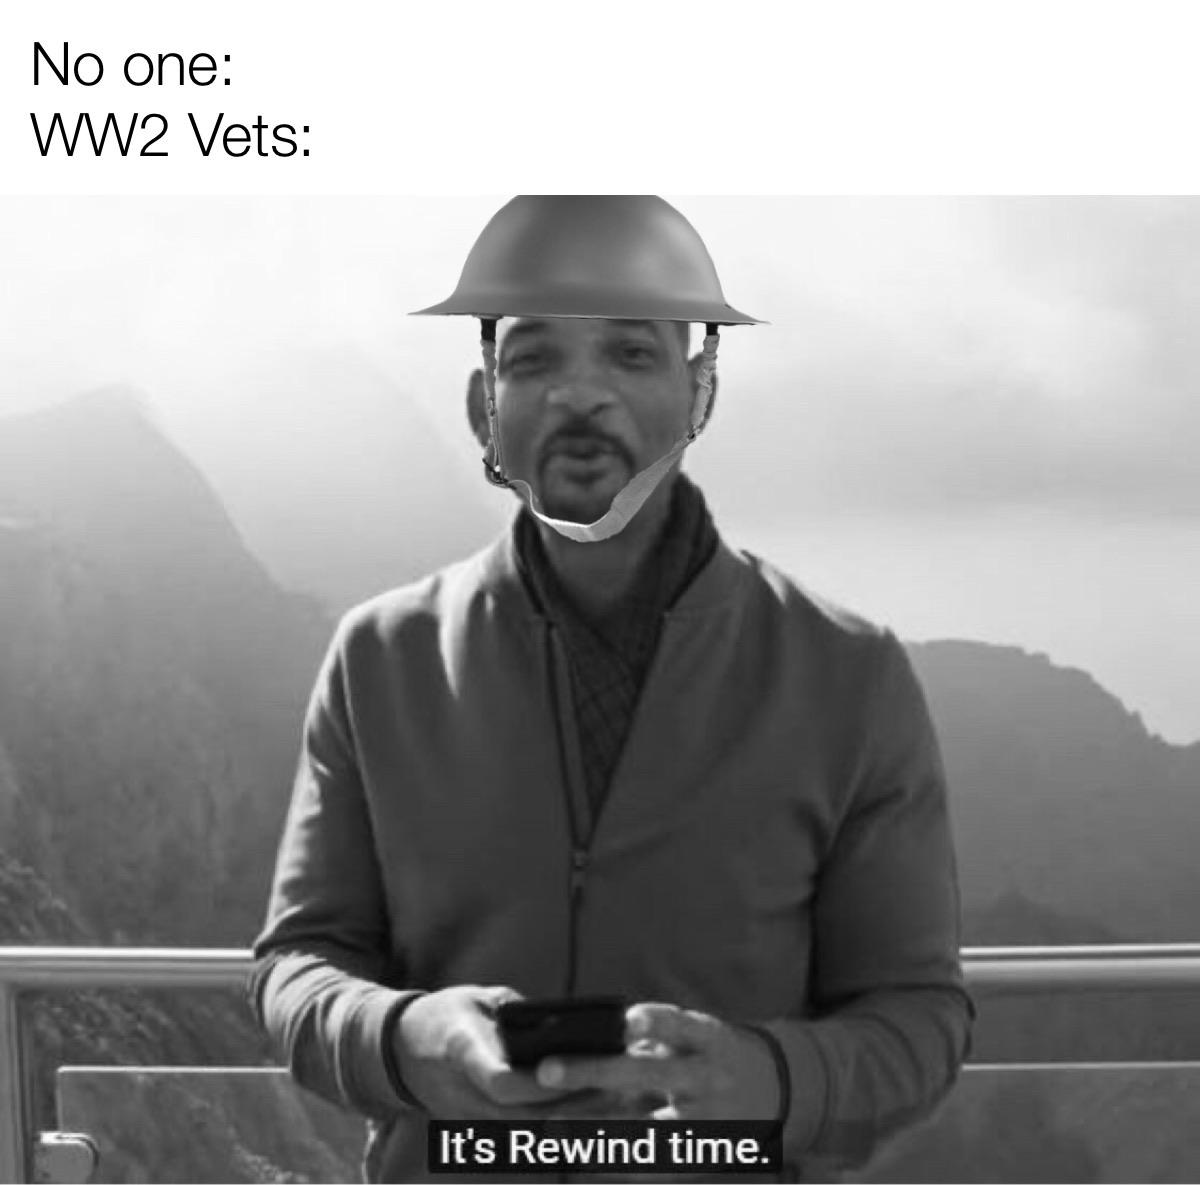 country time memes - No one WW2 Vets It's Rewind time.